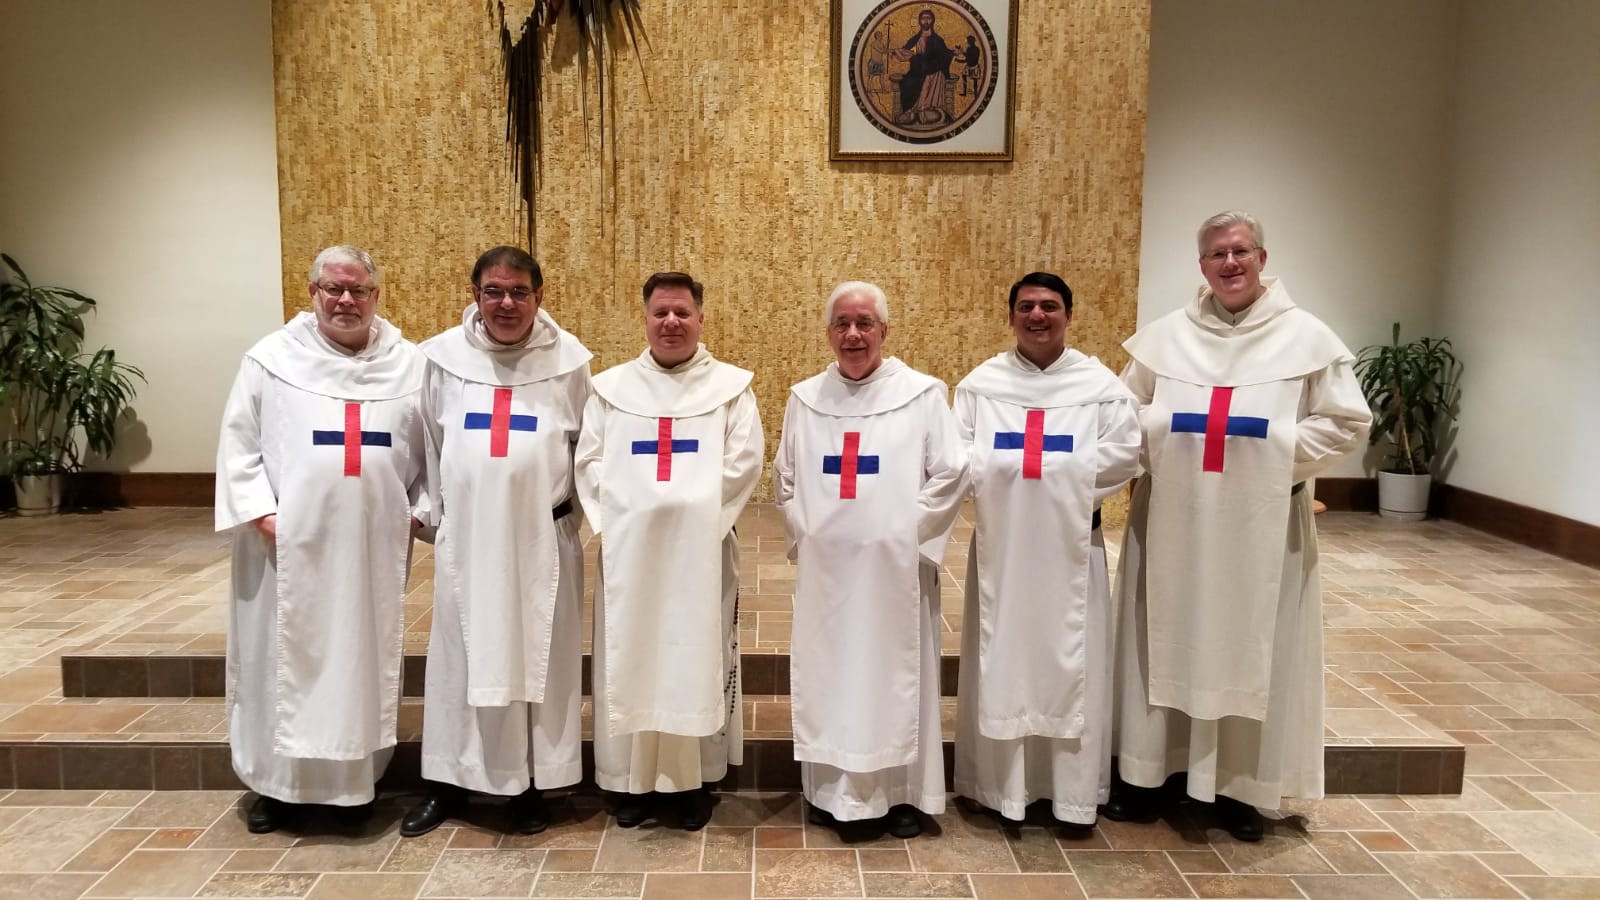 Fr. Thomas Dymowski, O.SS.T, University Chaplain, and Fr. James Mark Adame, O.SS.T, Associate Chaplain, have been elected to the Provincial Council of the Order of the Most Holy Trinity and of the Captives for a three year term.